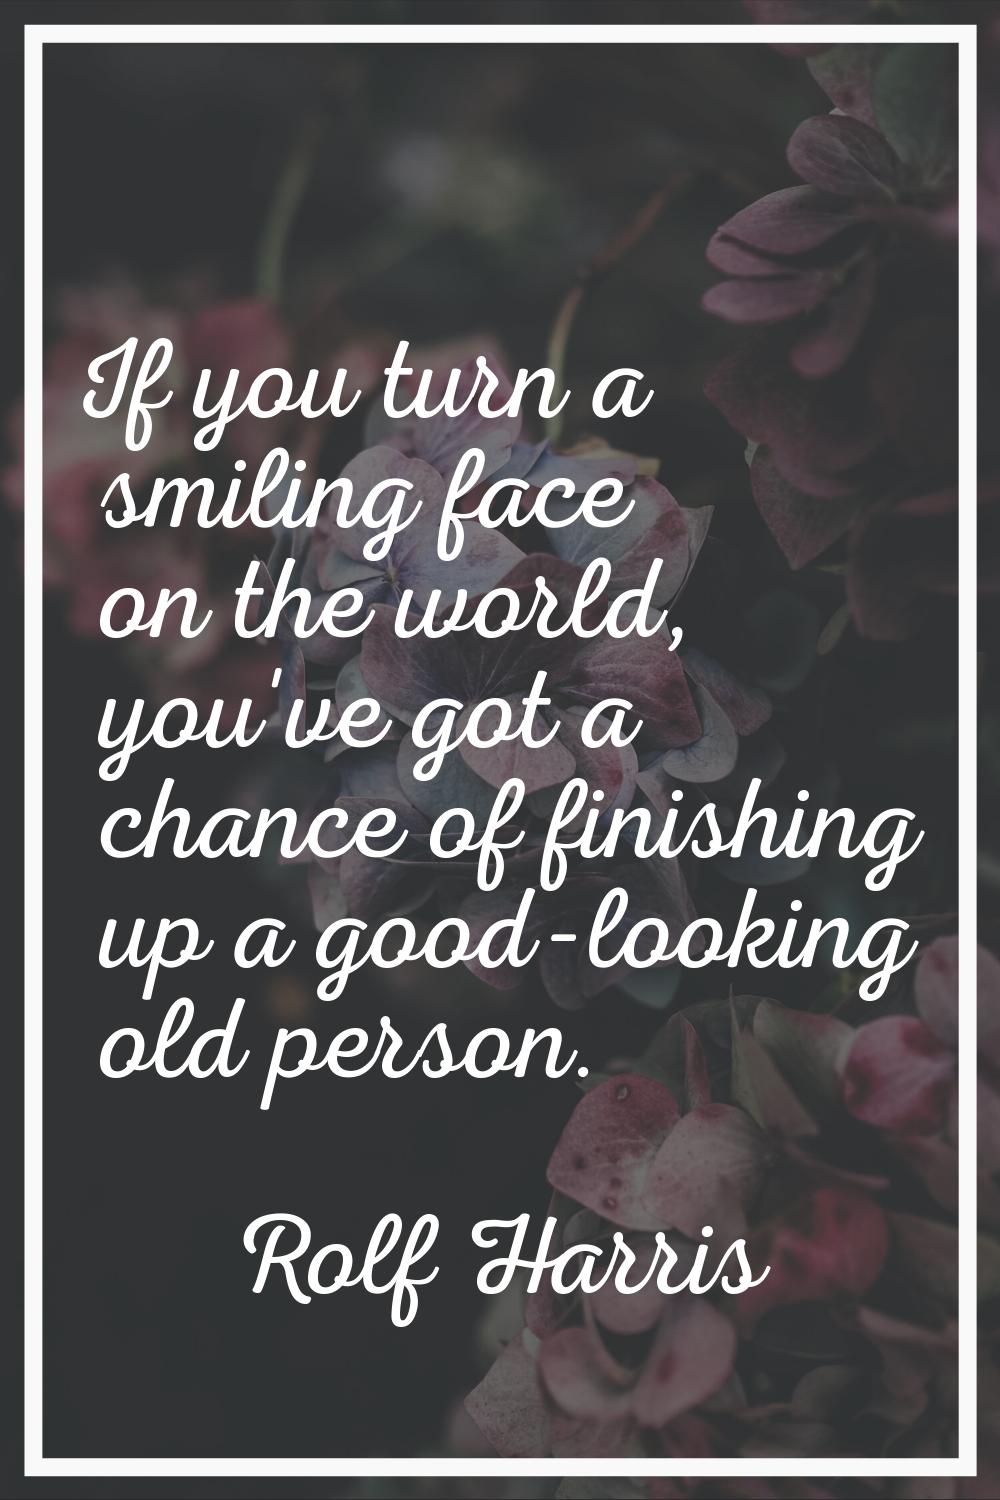 If you turn a smiling face on the world, you've got a chance of finishing up a good-looking old per